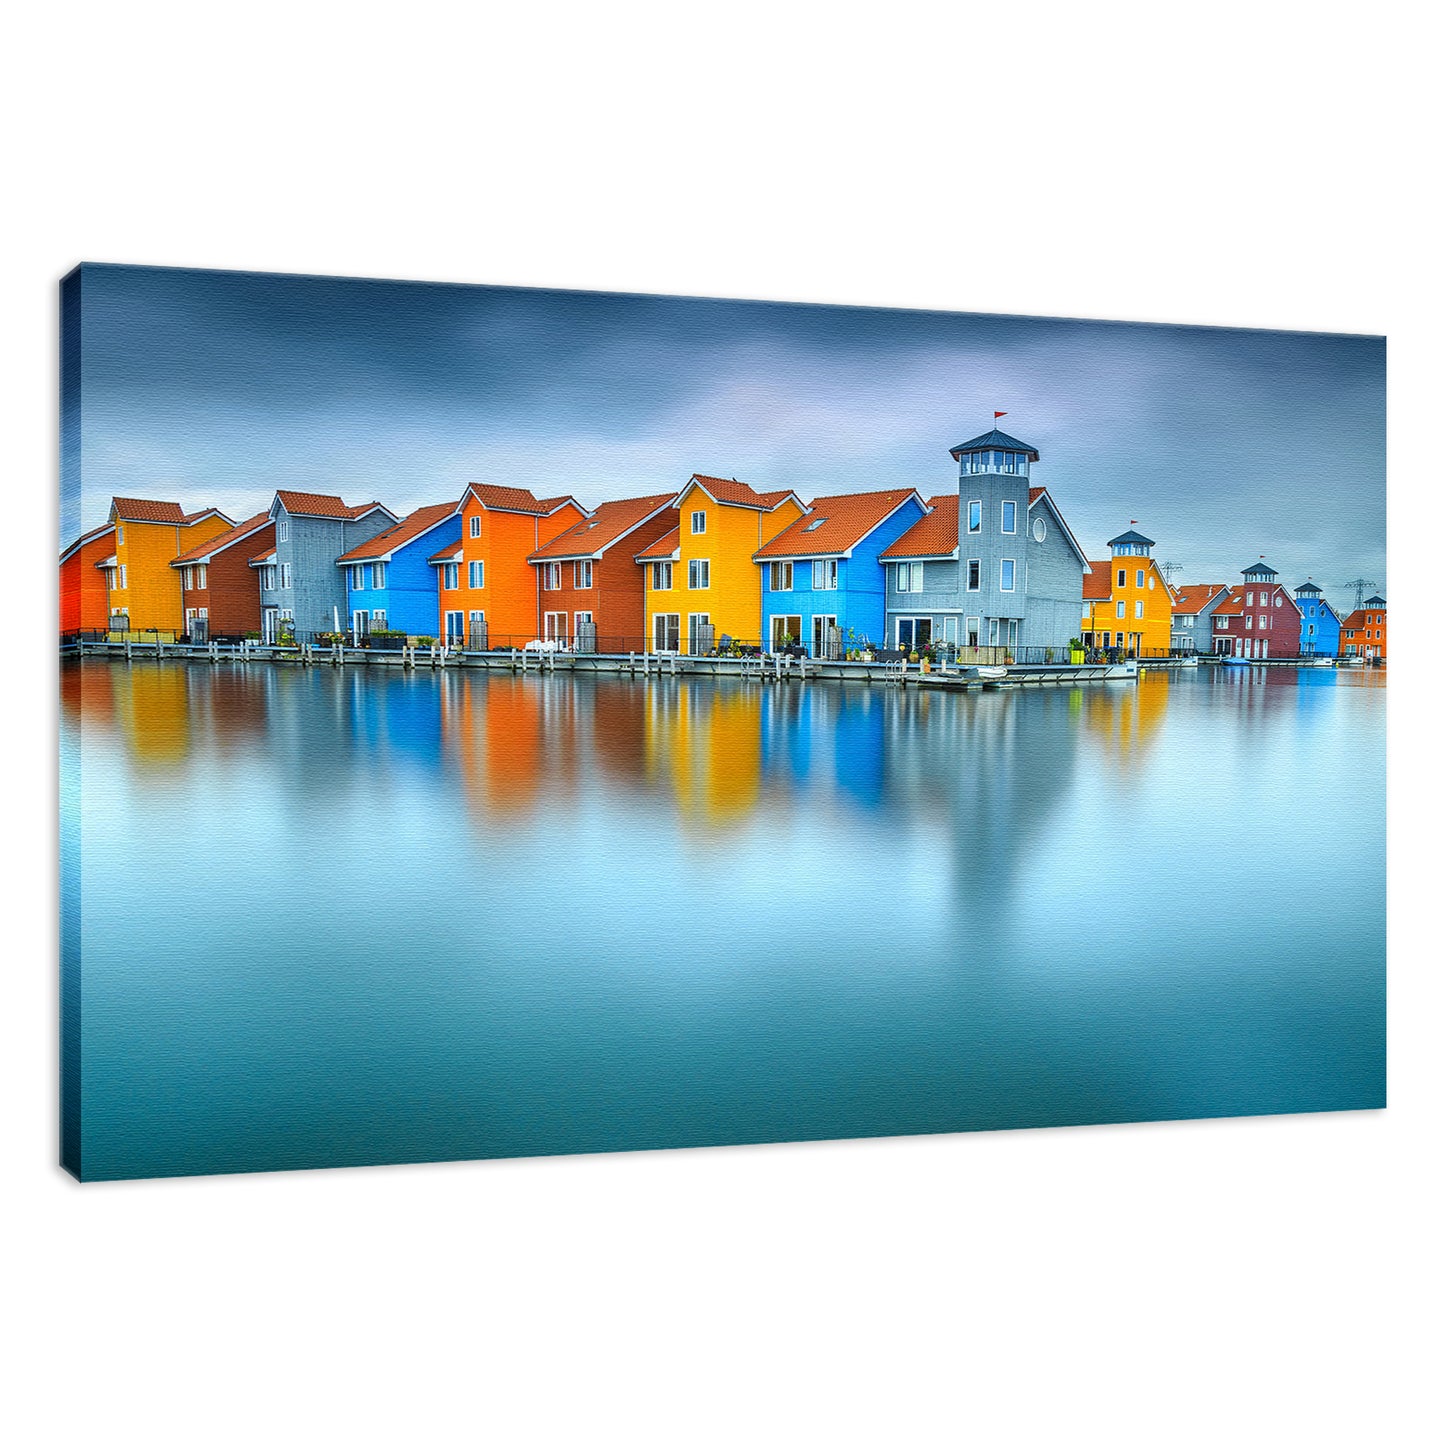 Blue Morning at Waters Edge Groningen Netherlands Europe Landscape Wall Art Canvas Prints  - PIPAFINEART